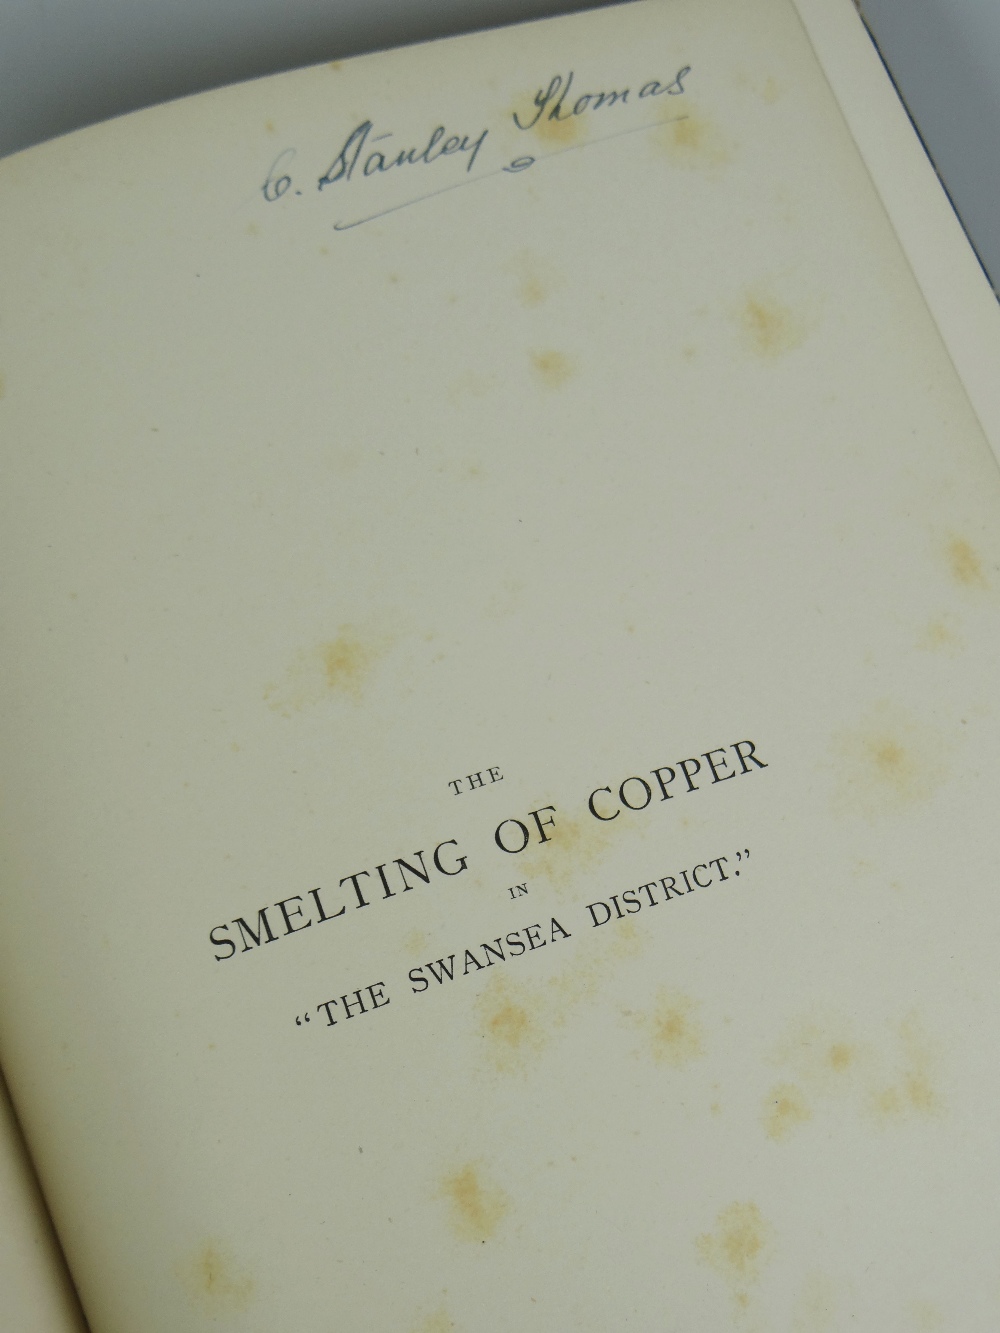 COL GRANT FRANCIS 'The Smelting of Copper in the Swansea District of South Wales from the Time of